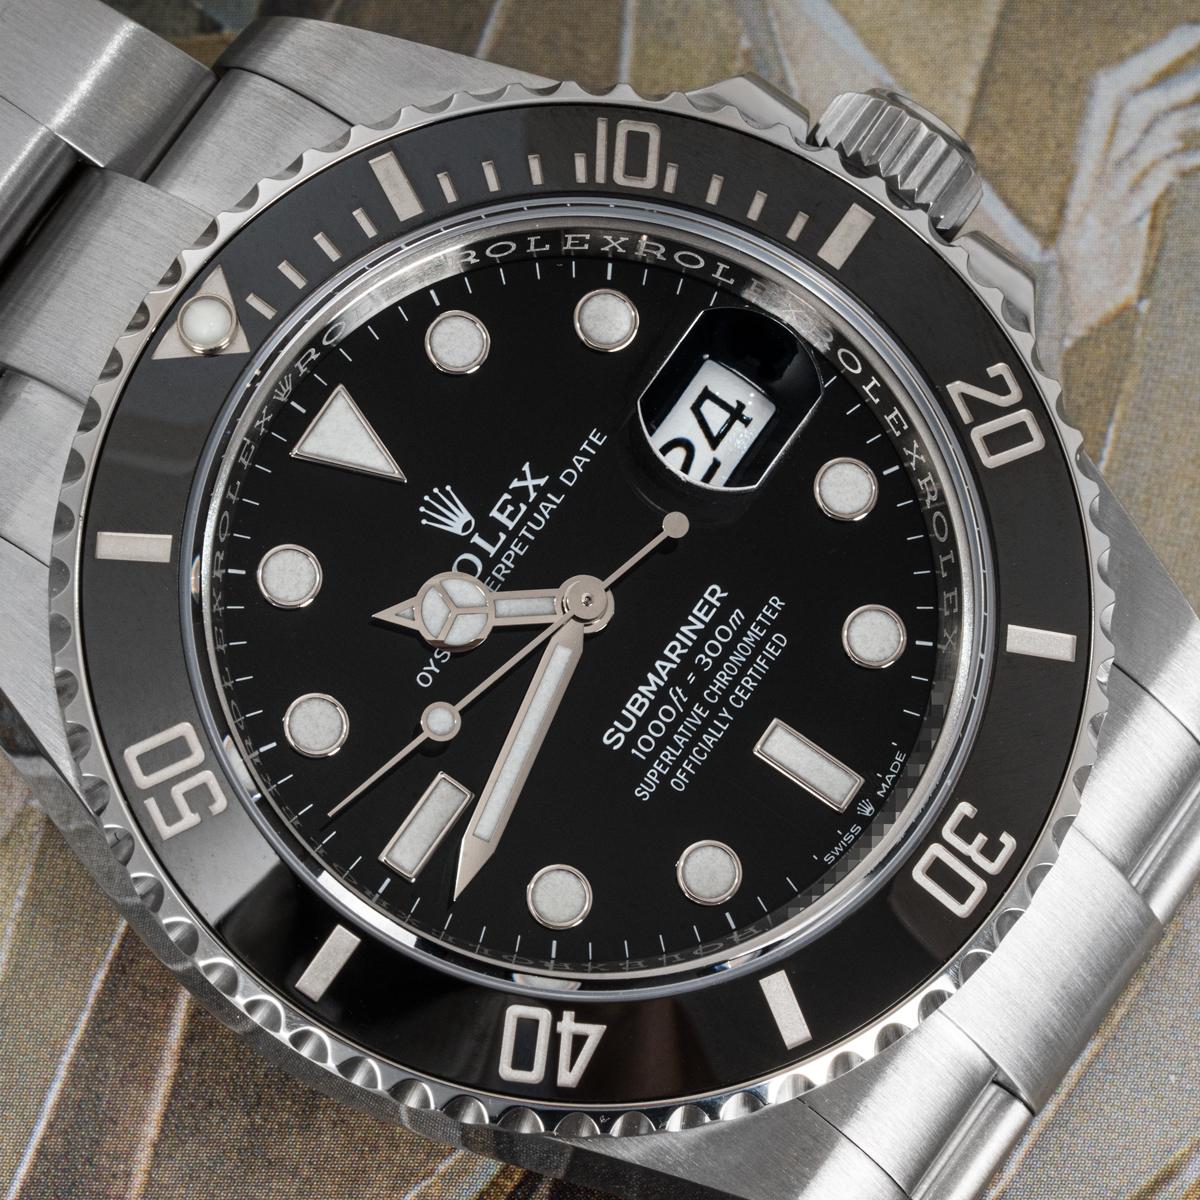 A 41mm Submariner Date in Oystersteel by Rolex. Features a black dial and a black ceramic unidirectional rotatable bezel with 60-minute graduations coated in platinum.

Fitted with a scratch-resistant sapphire crystal, a self-winding automatic